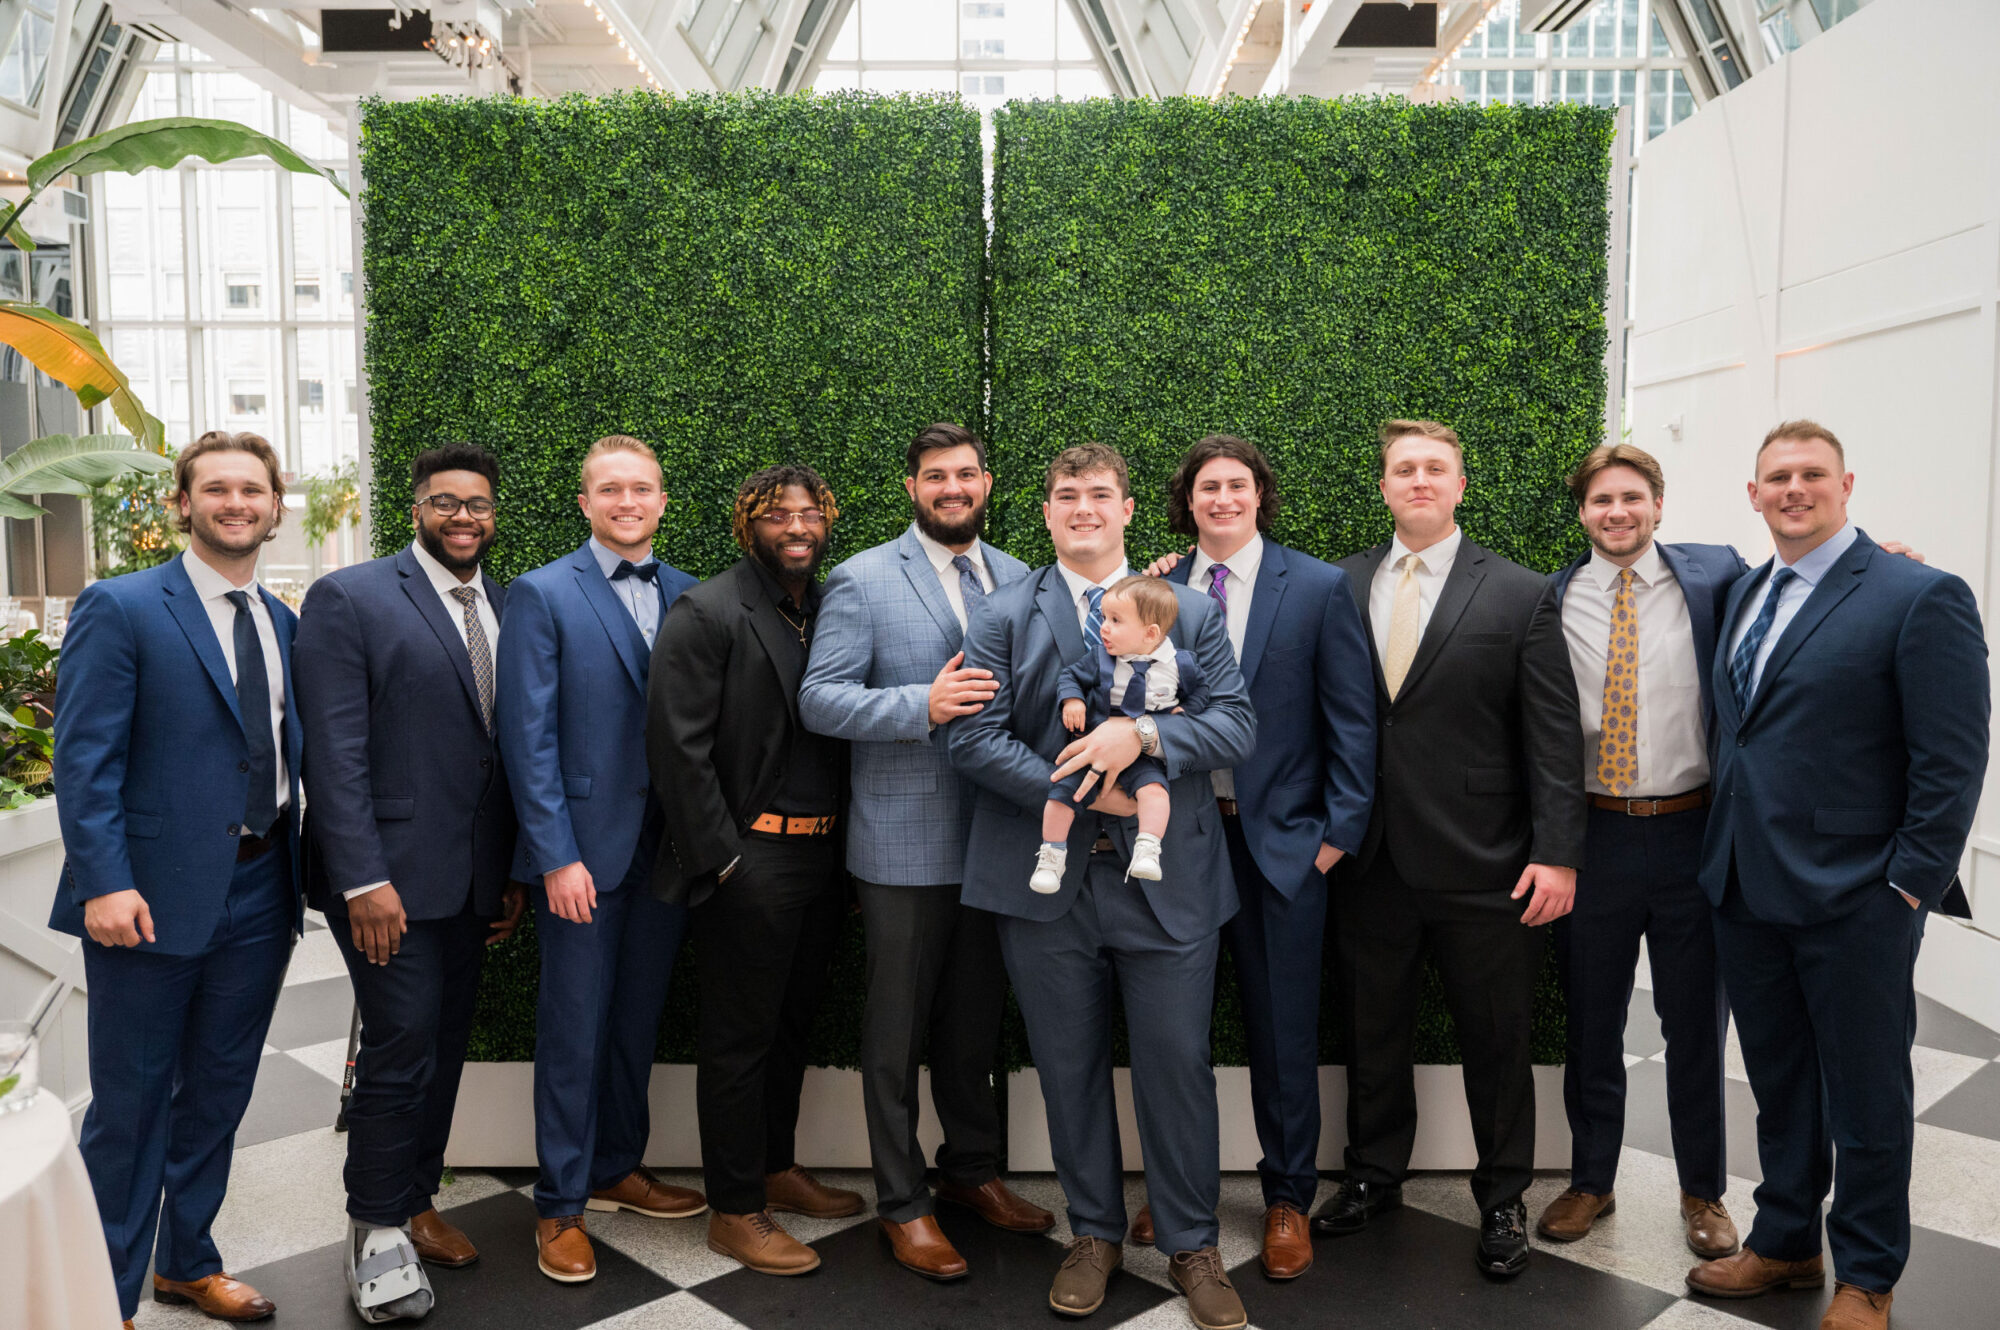 cocktail hour group photo at ppg wintergarden pittsburgh • PPG Wintergarden Weddings: Modern Glass-Walled Pittsburgh Receptions You'll Love!